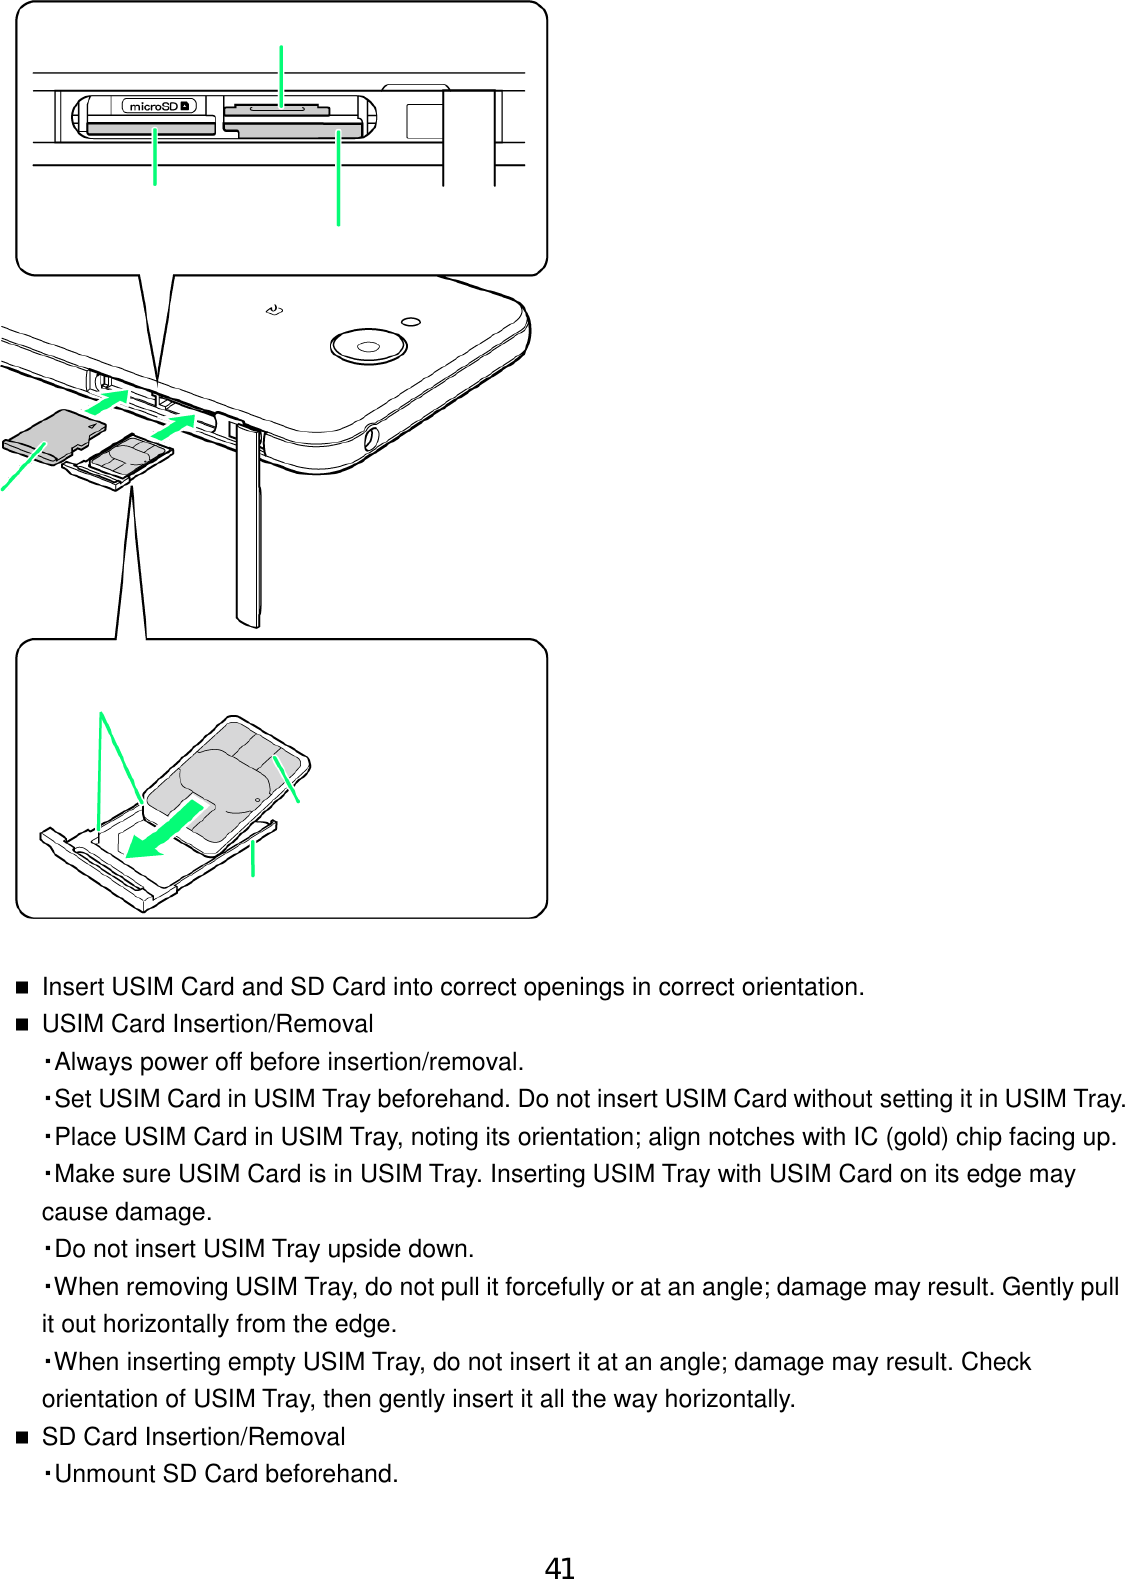 Insert USIM Card and SD Card into correct openings in correct orientation.USIM Card Insertion/Removal・Always power off before insertion/removal.・Set USIM Card in USIM Tray beforehand. Do not insert USIM Card without setting it in USIM Tray.・Place USIM Card in USIM Tray, noting its orientation; align notches with IC (gold) chip facing up.・Make sure USIM Card is in USIM Tray. Inserting USIM Tray with USIM Card on its edge maycause damage.・Do not insert USIM Tray upside down.・When removing USIM Tray, do not pull it forcefully or at an angle; damage may result. Gently pullit out horizontally from the edge.・When inserting empty USIM Tray, do not insert it at an angle; damage may result. Checkorientation of USIM Tray, then gently insert it all the way horizontally.SD Card Insertion/Removal・Unmount SD Card beforehand.41